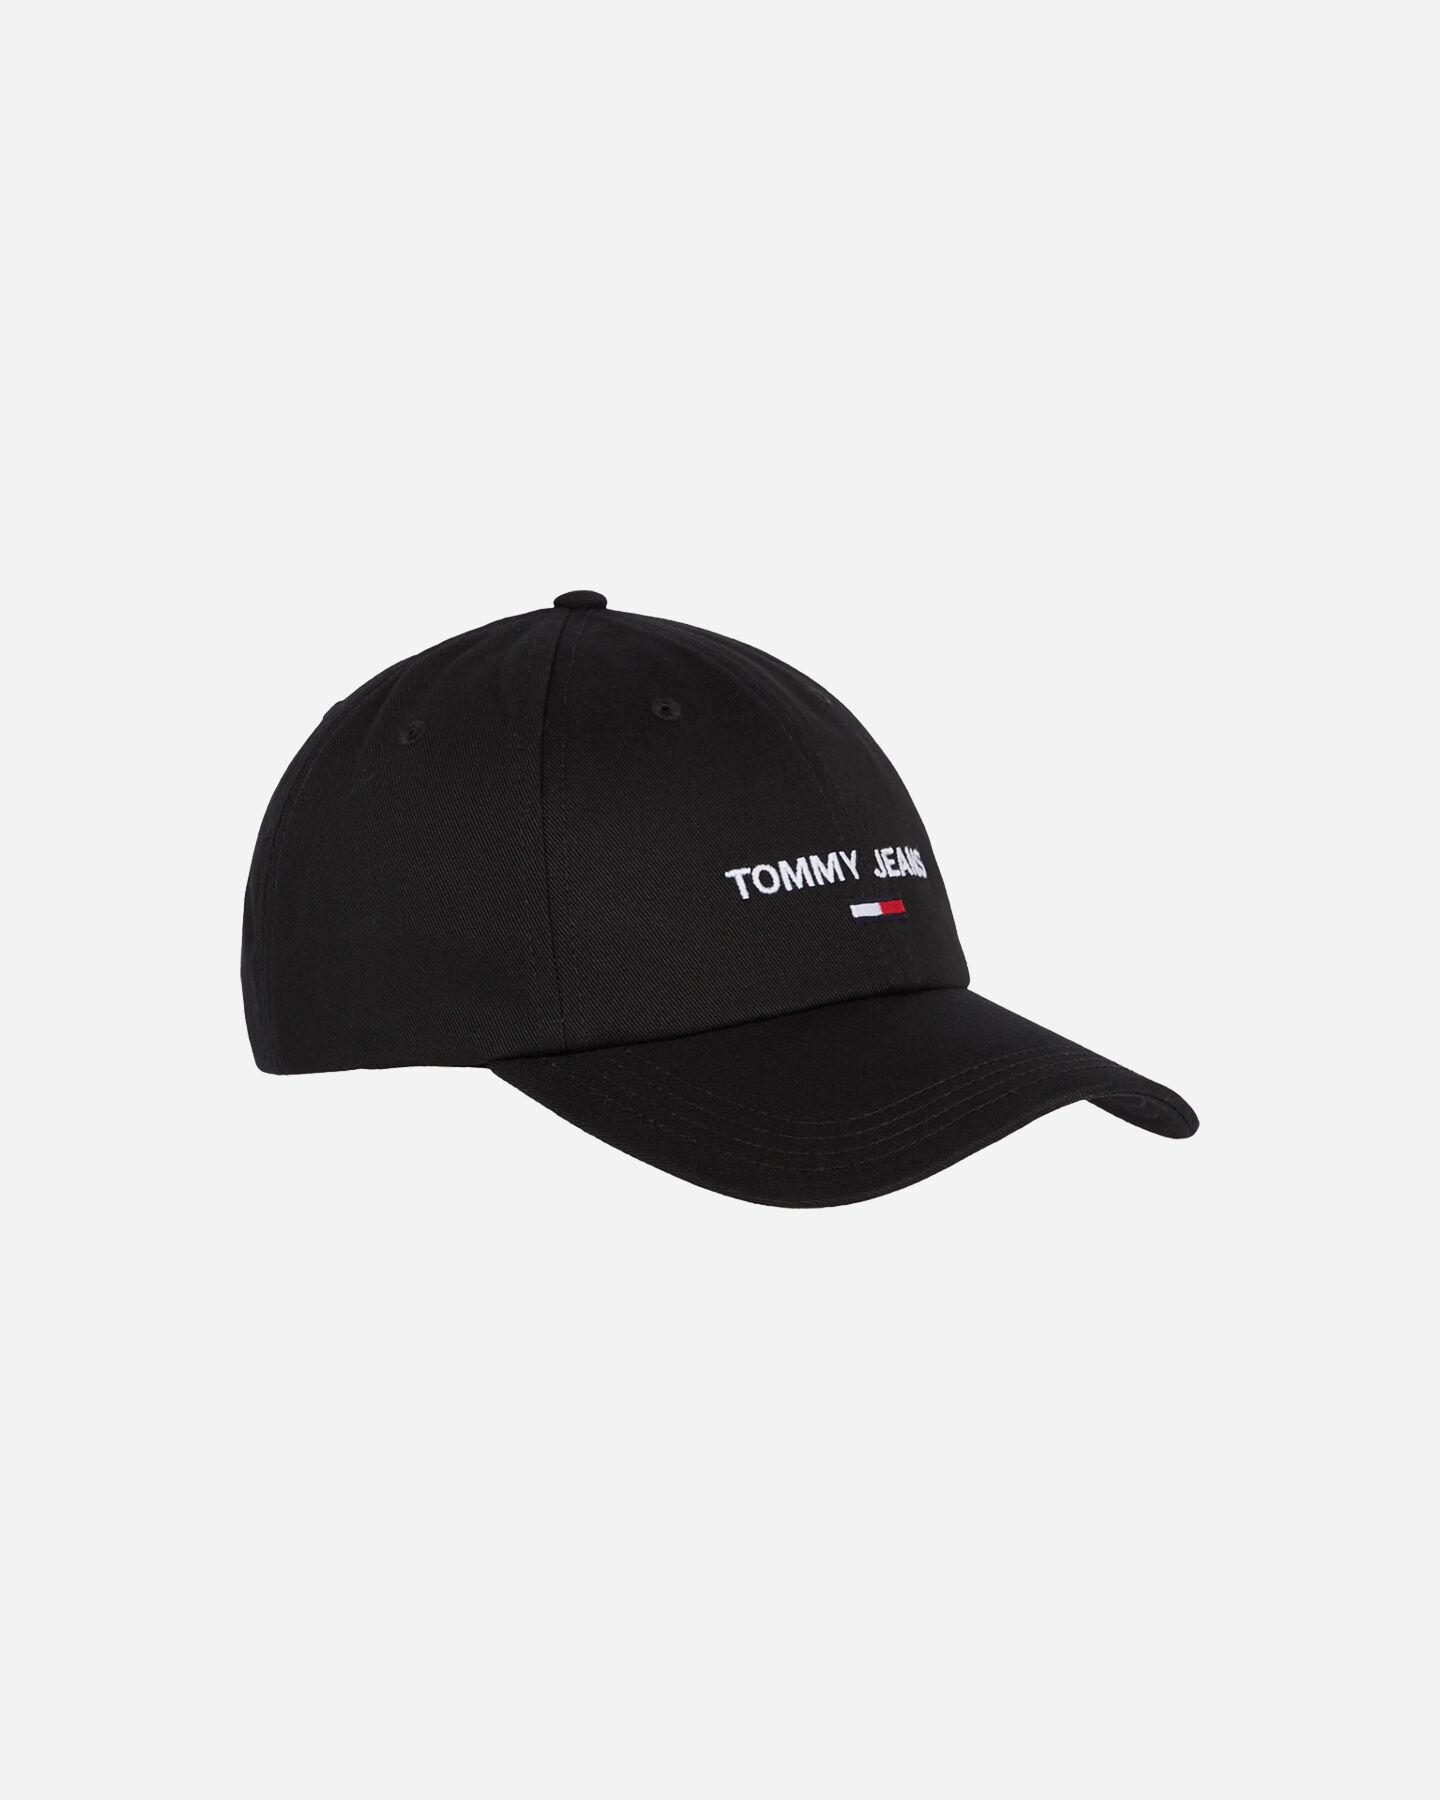  Cappellino TOMMY HILFIGER LOGO M S4115006|BDS|OS scatto 0